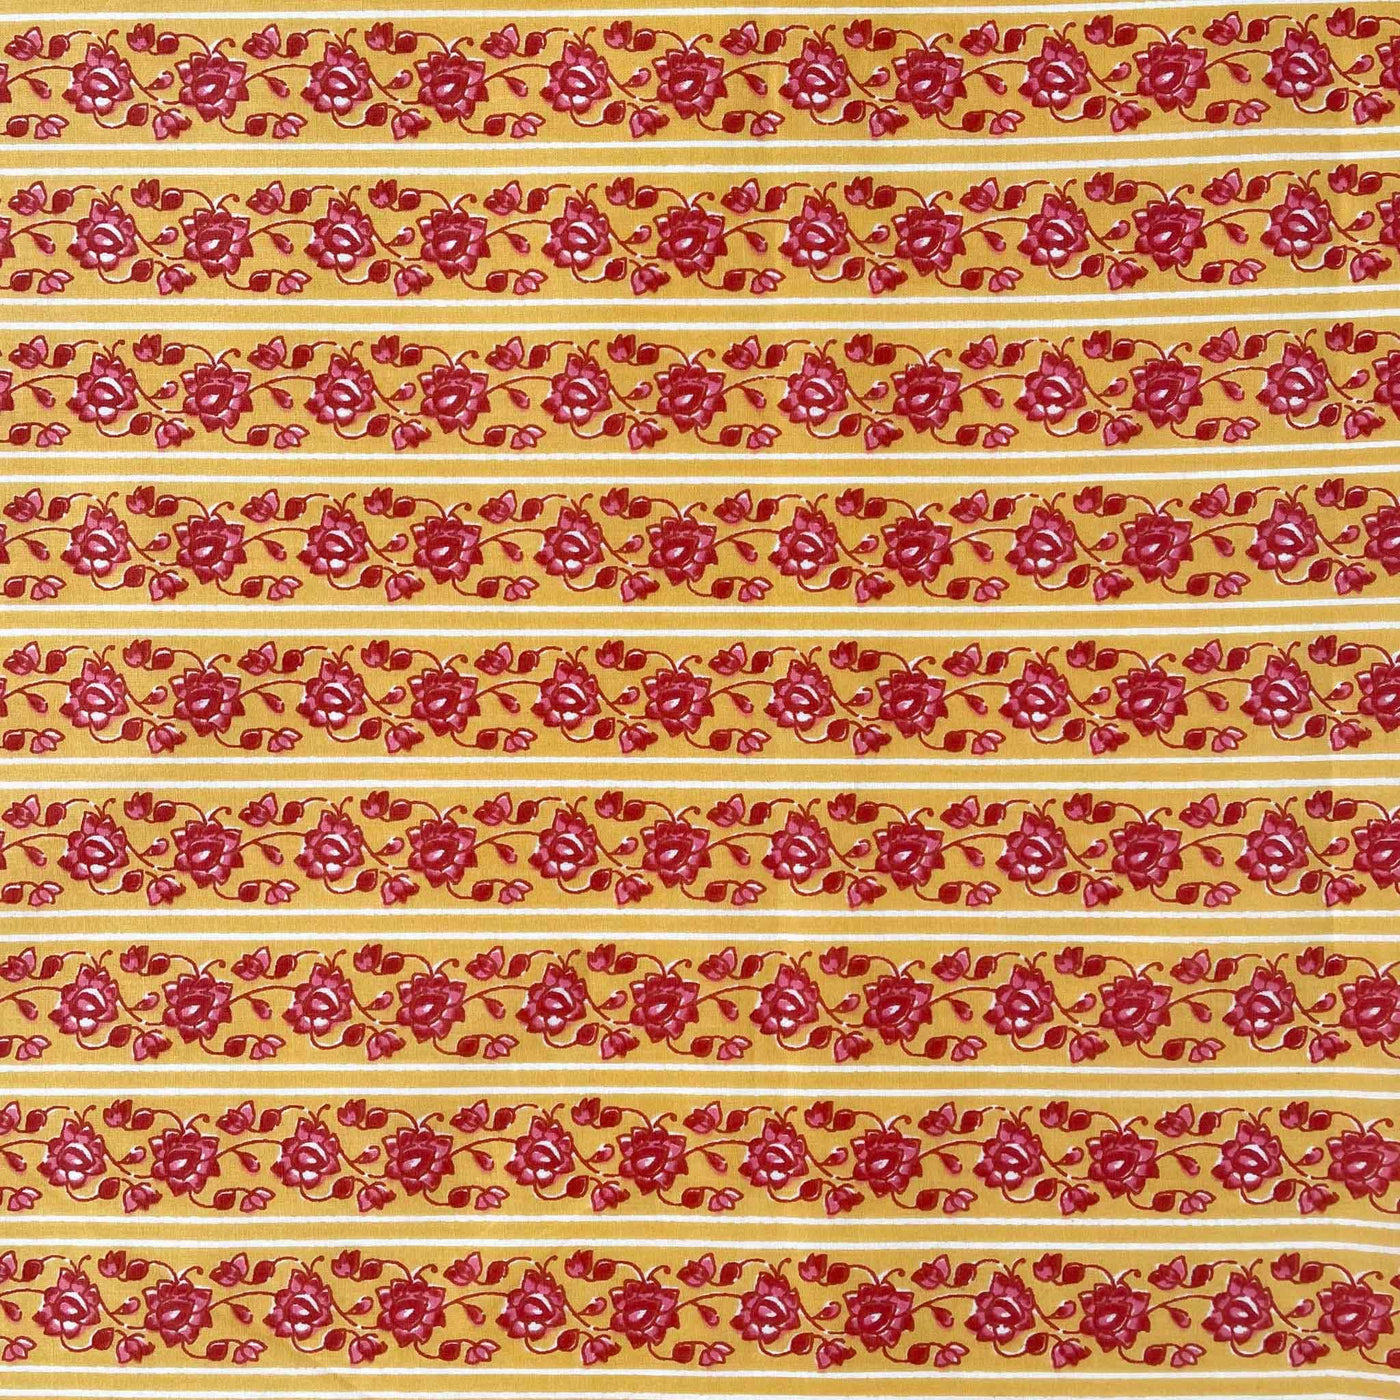 Fabric Pandit Fabric Mango Yellow & Pink Mughal Floral Stripes Hand Block Printed Pure Cotton Cambric Fabric (Width 42 Inches)